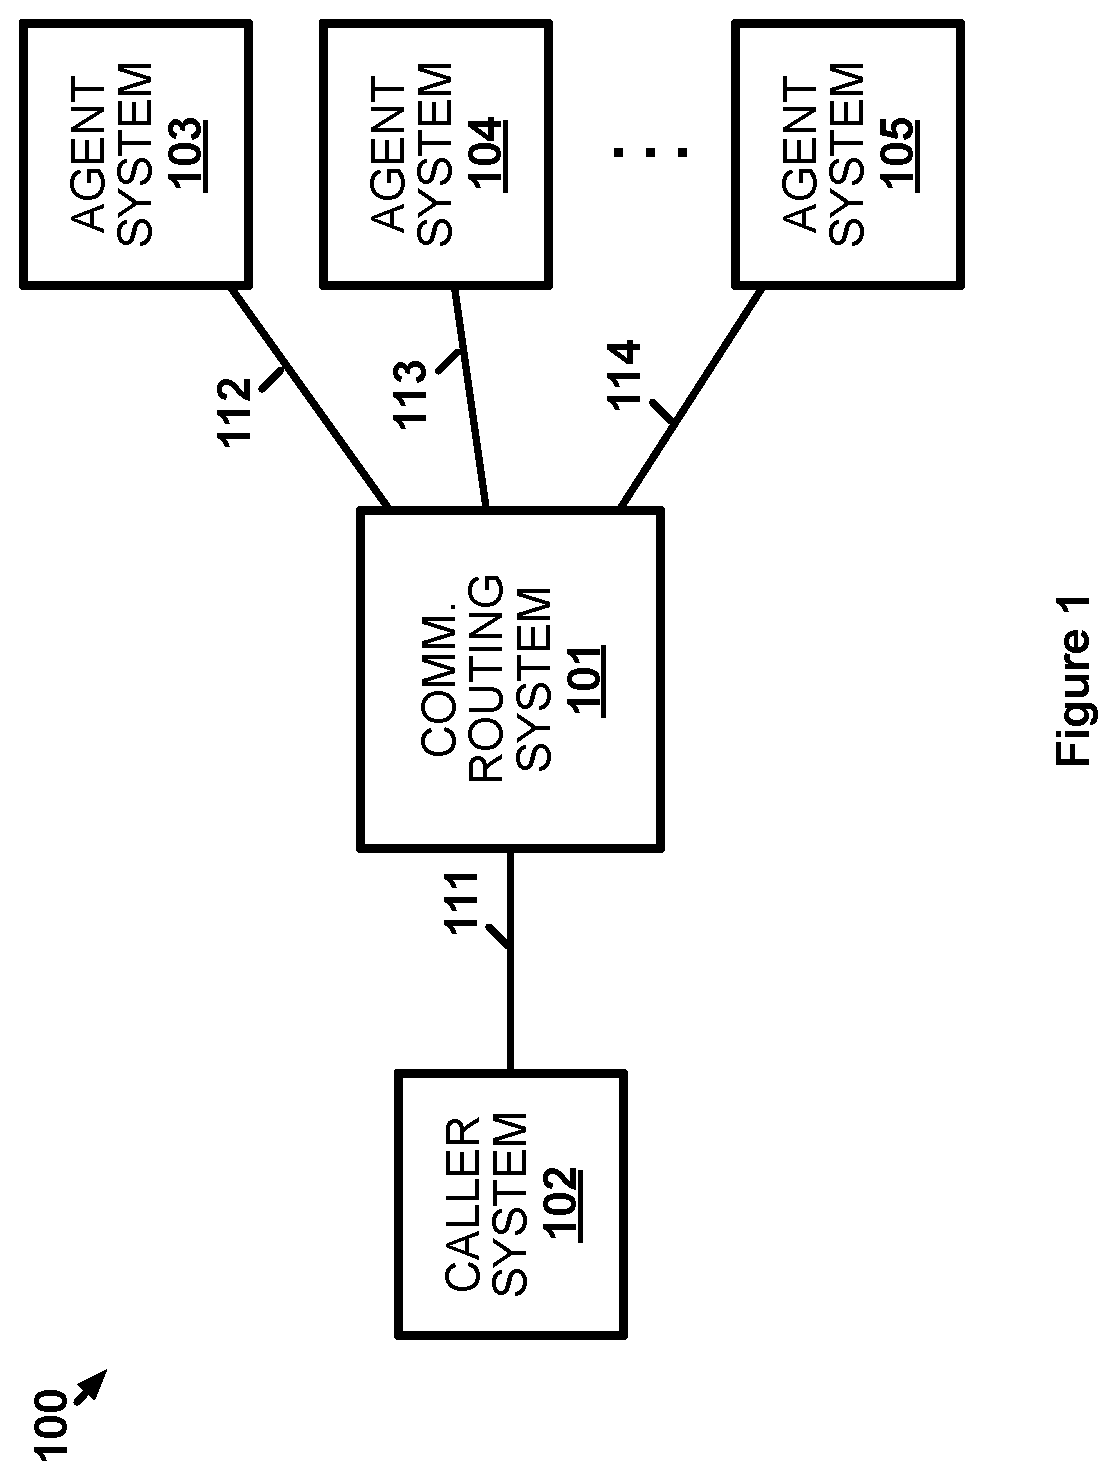 Agent selection in a contact center based on likelihood of a communication changing modes